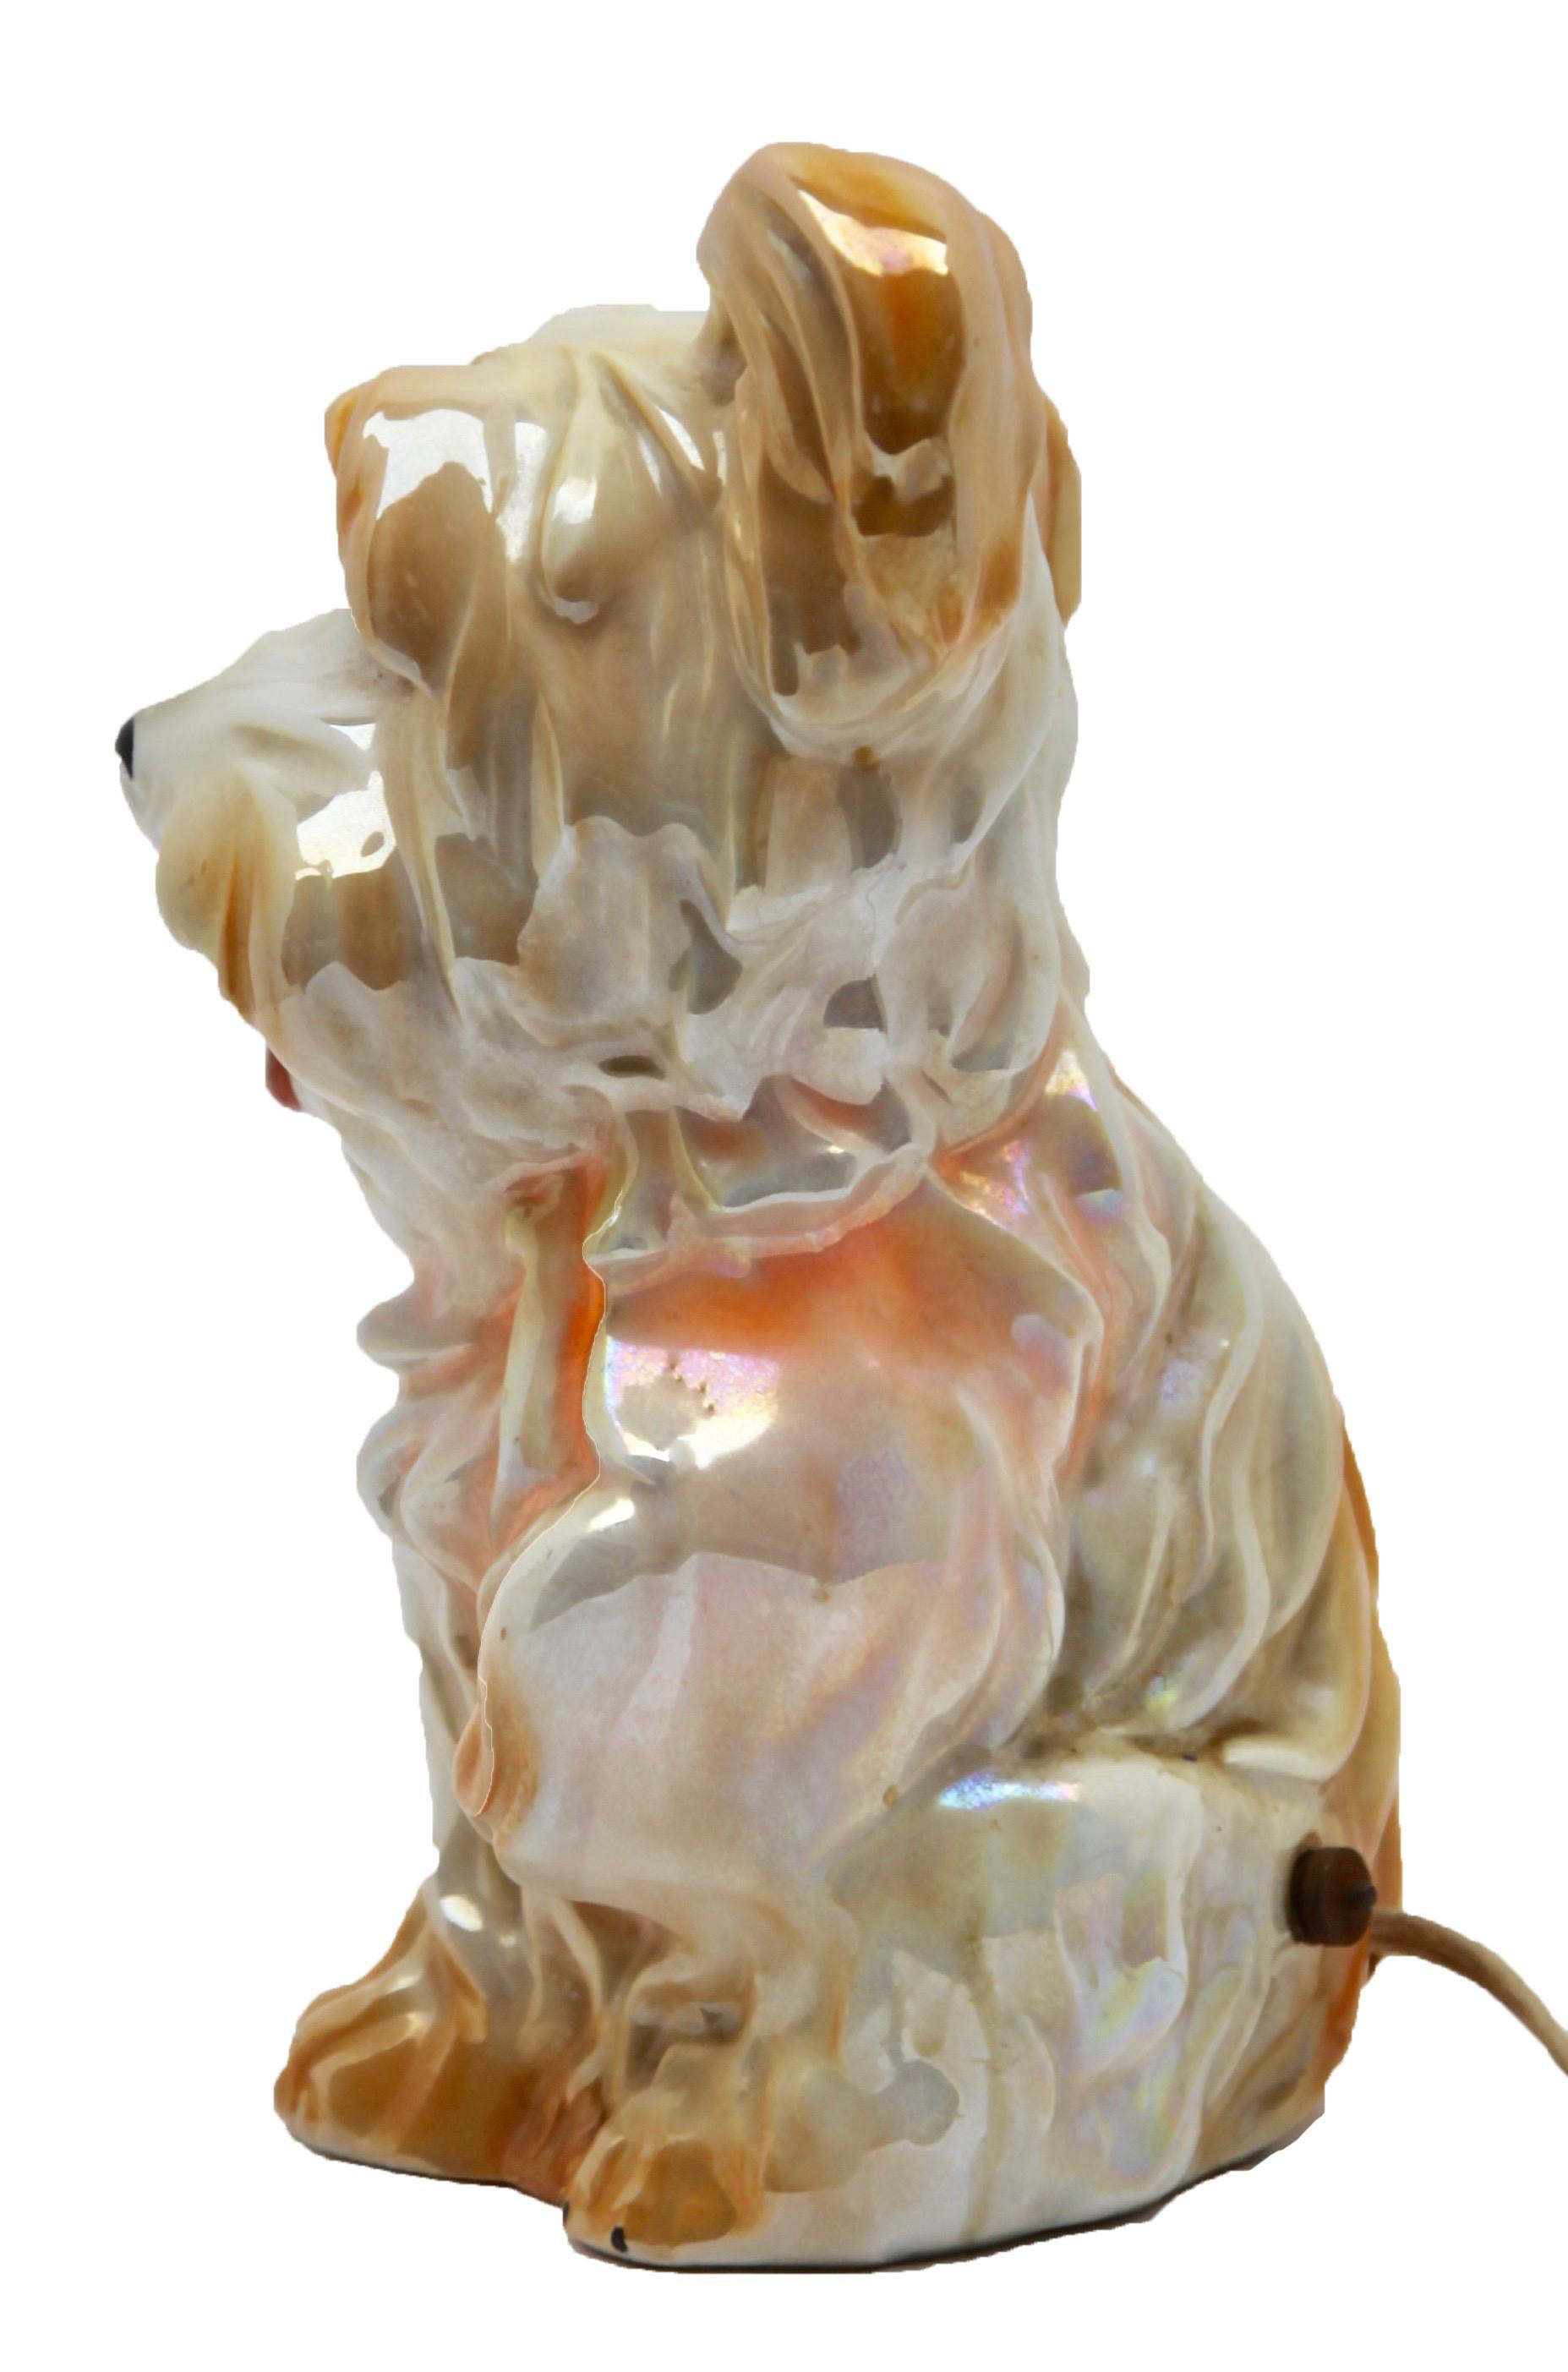 Rare and gorgeous dog perfume lamp attributed to Carl Scheidig Grafenthal, Germany.
Excellent condition, lamp is in working order.
Size: Height 17 cm, 6.7 in, width 11 cm, 4.33 in.
Germany, 1930s, excellent condition
Porcelain figurine / air